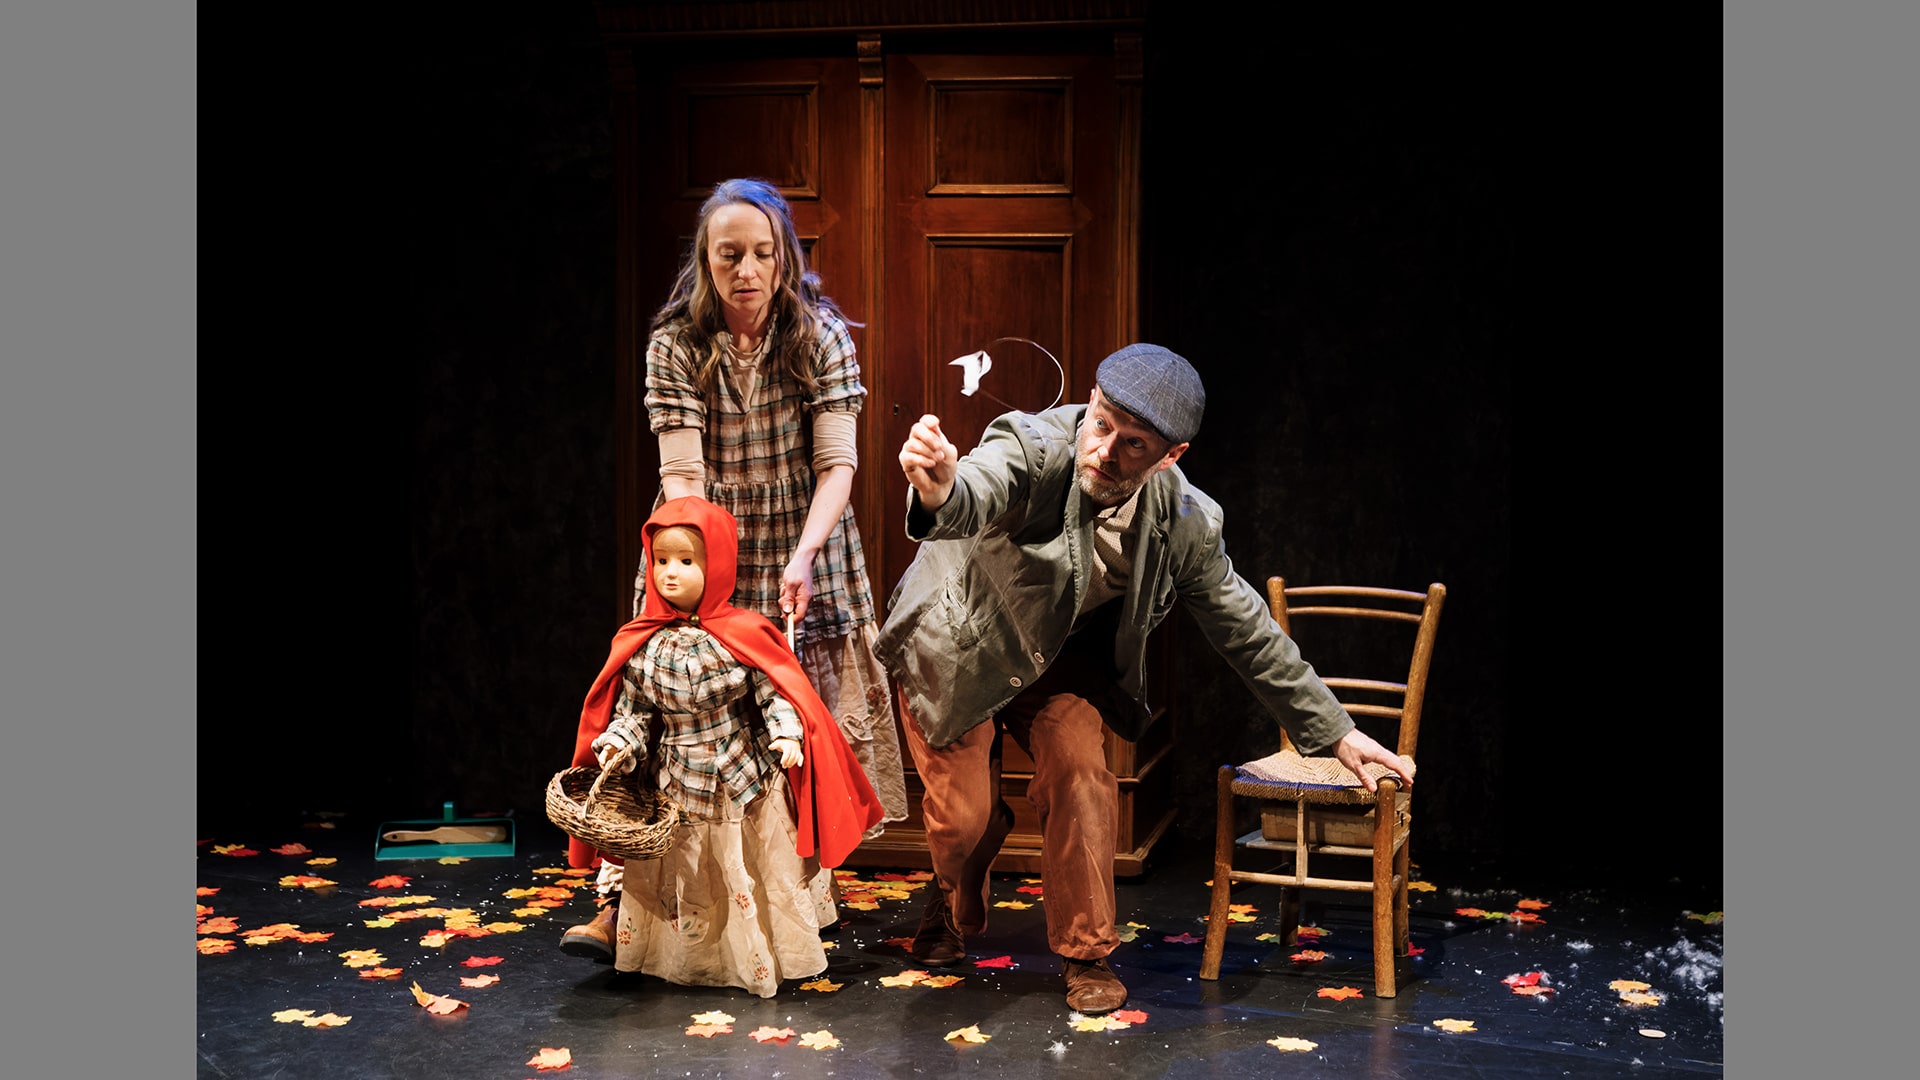 A photo of two actors on stage. A woman moves a puppet of a girl wearing a red cloak and carrying a basket. A man leans foward, balancing one hand on a wooden chair. He is wearing a green jacket and grey flatcap